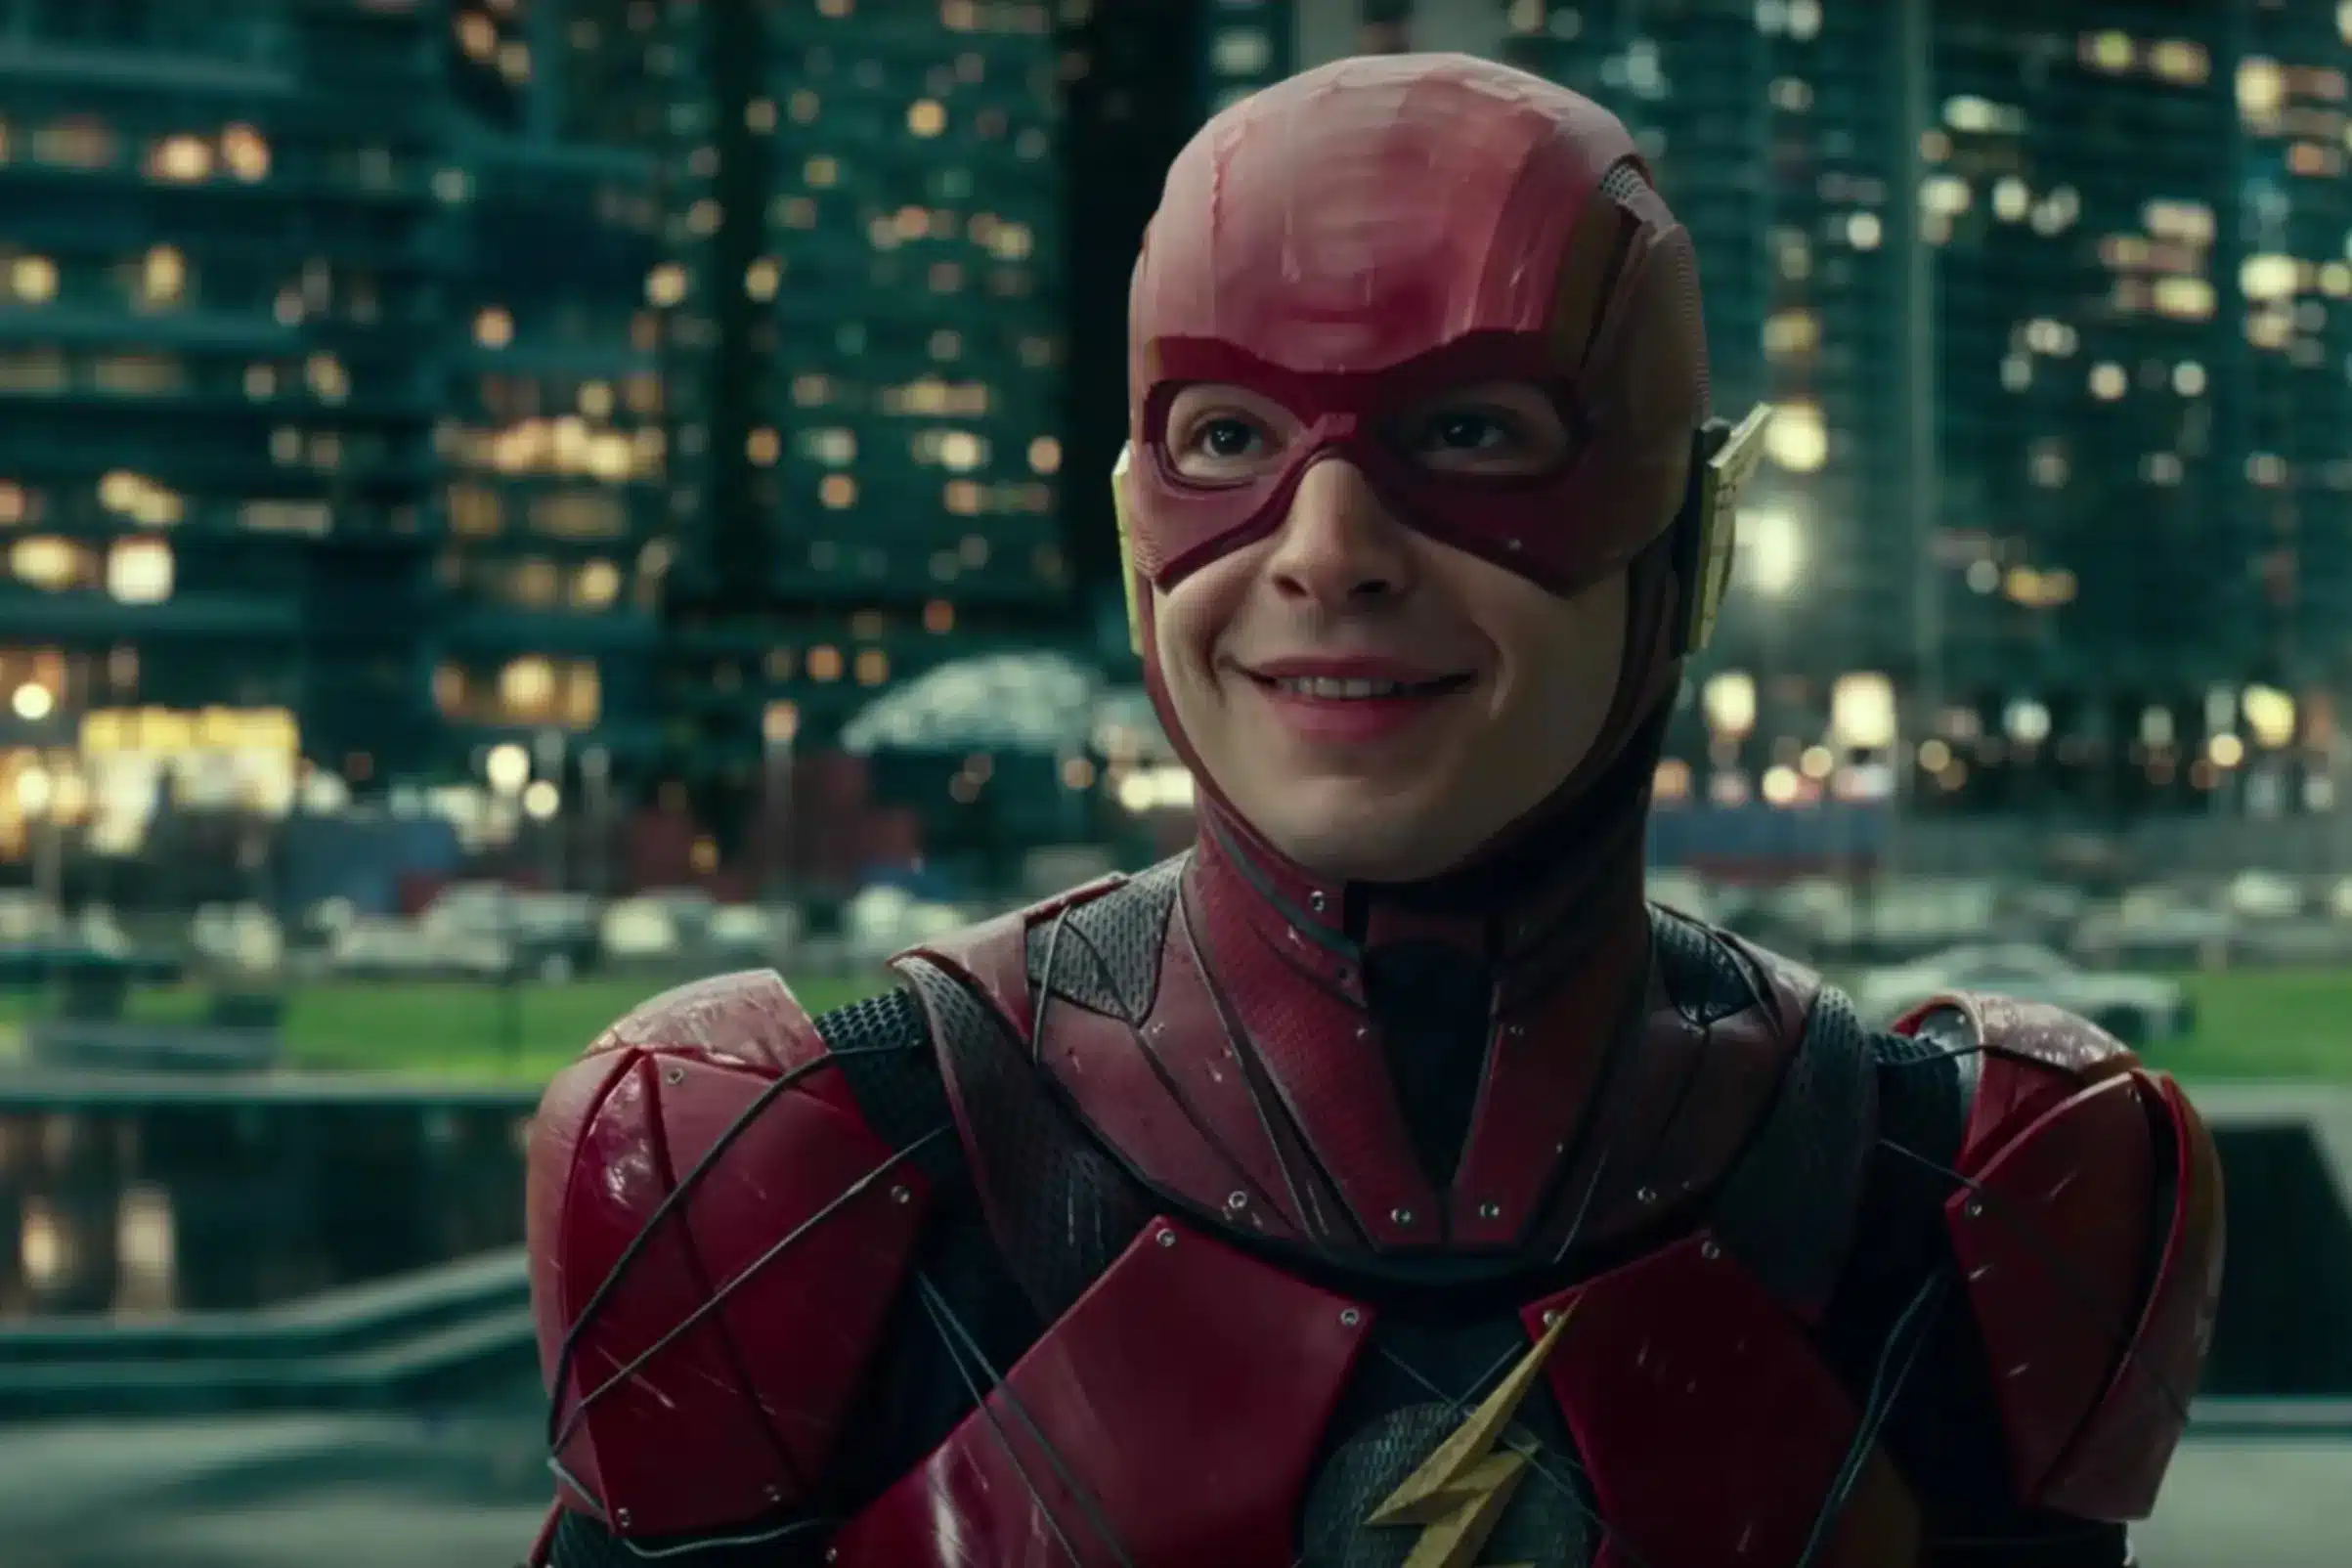 The Flash Movie Review- DC’s Return Or Another Misfire?